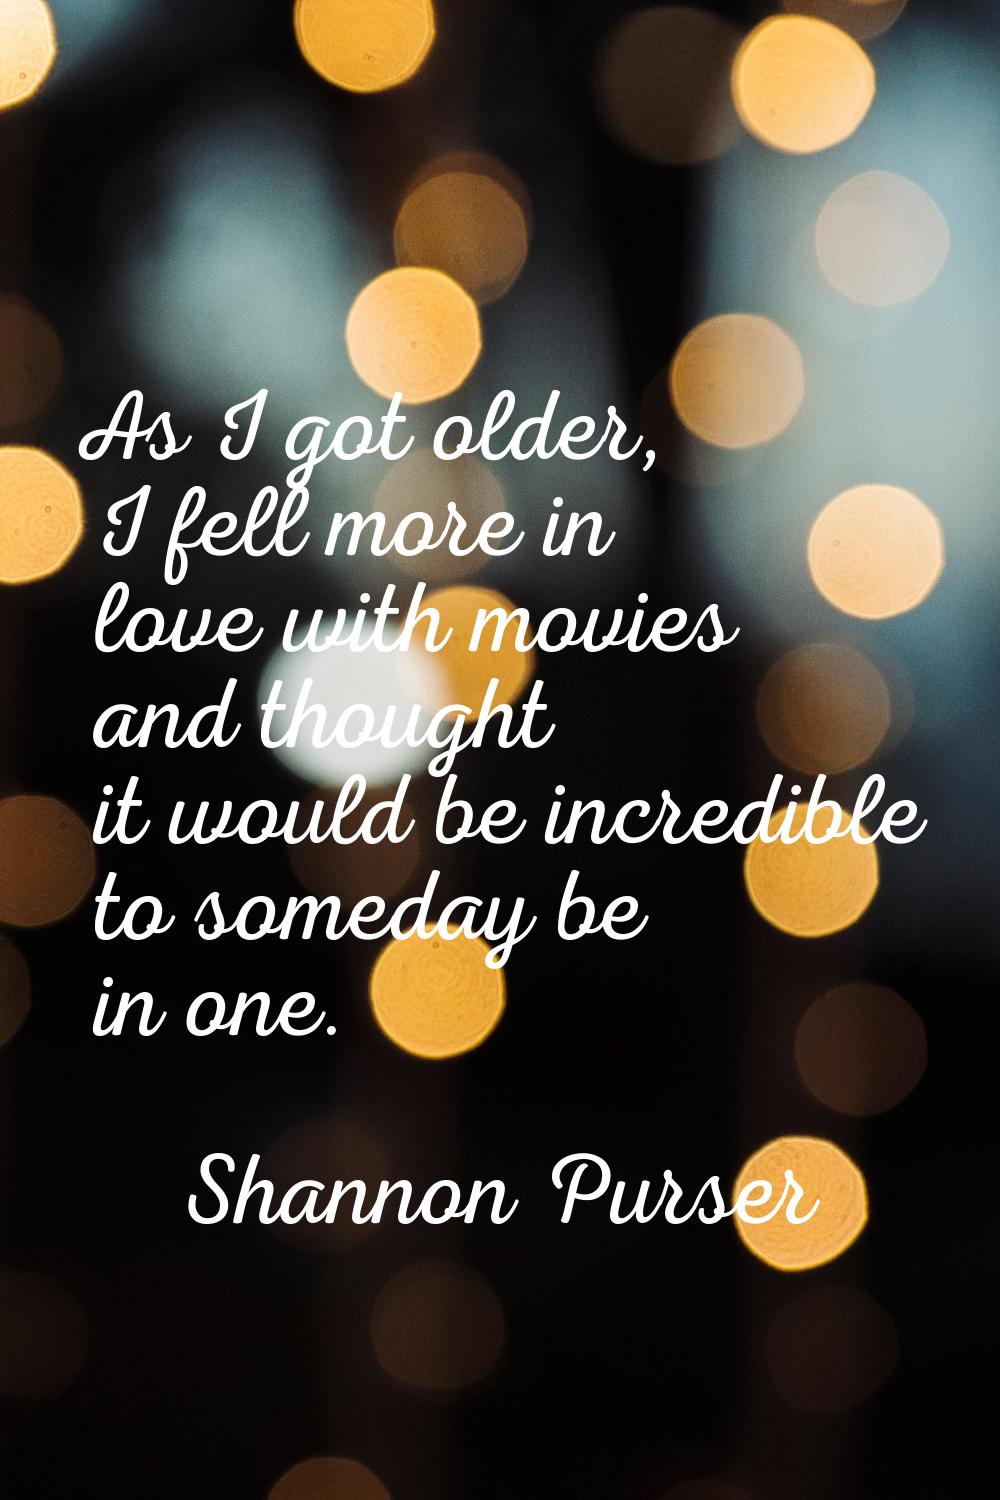 As I got older, I fell more in love with movies and thought it would be incredible to someday be in